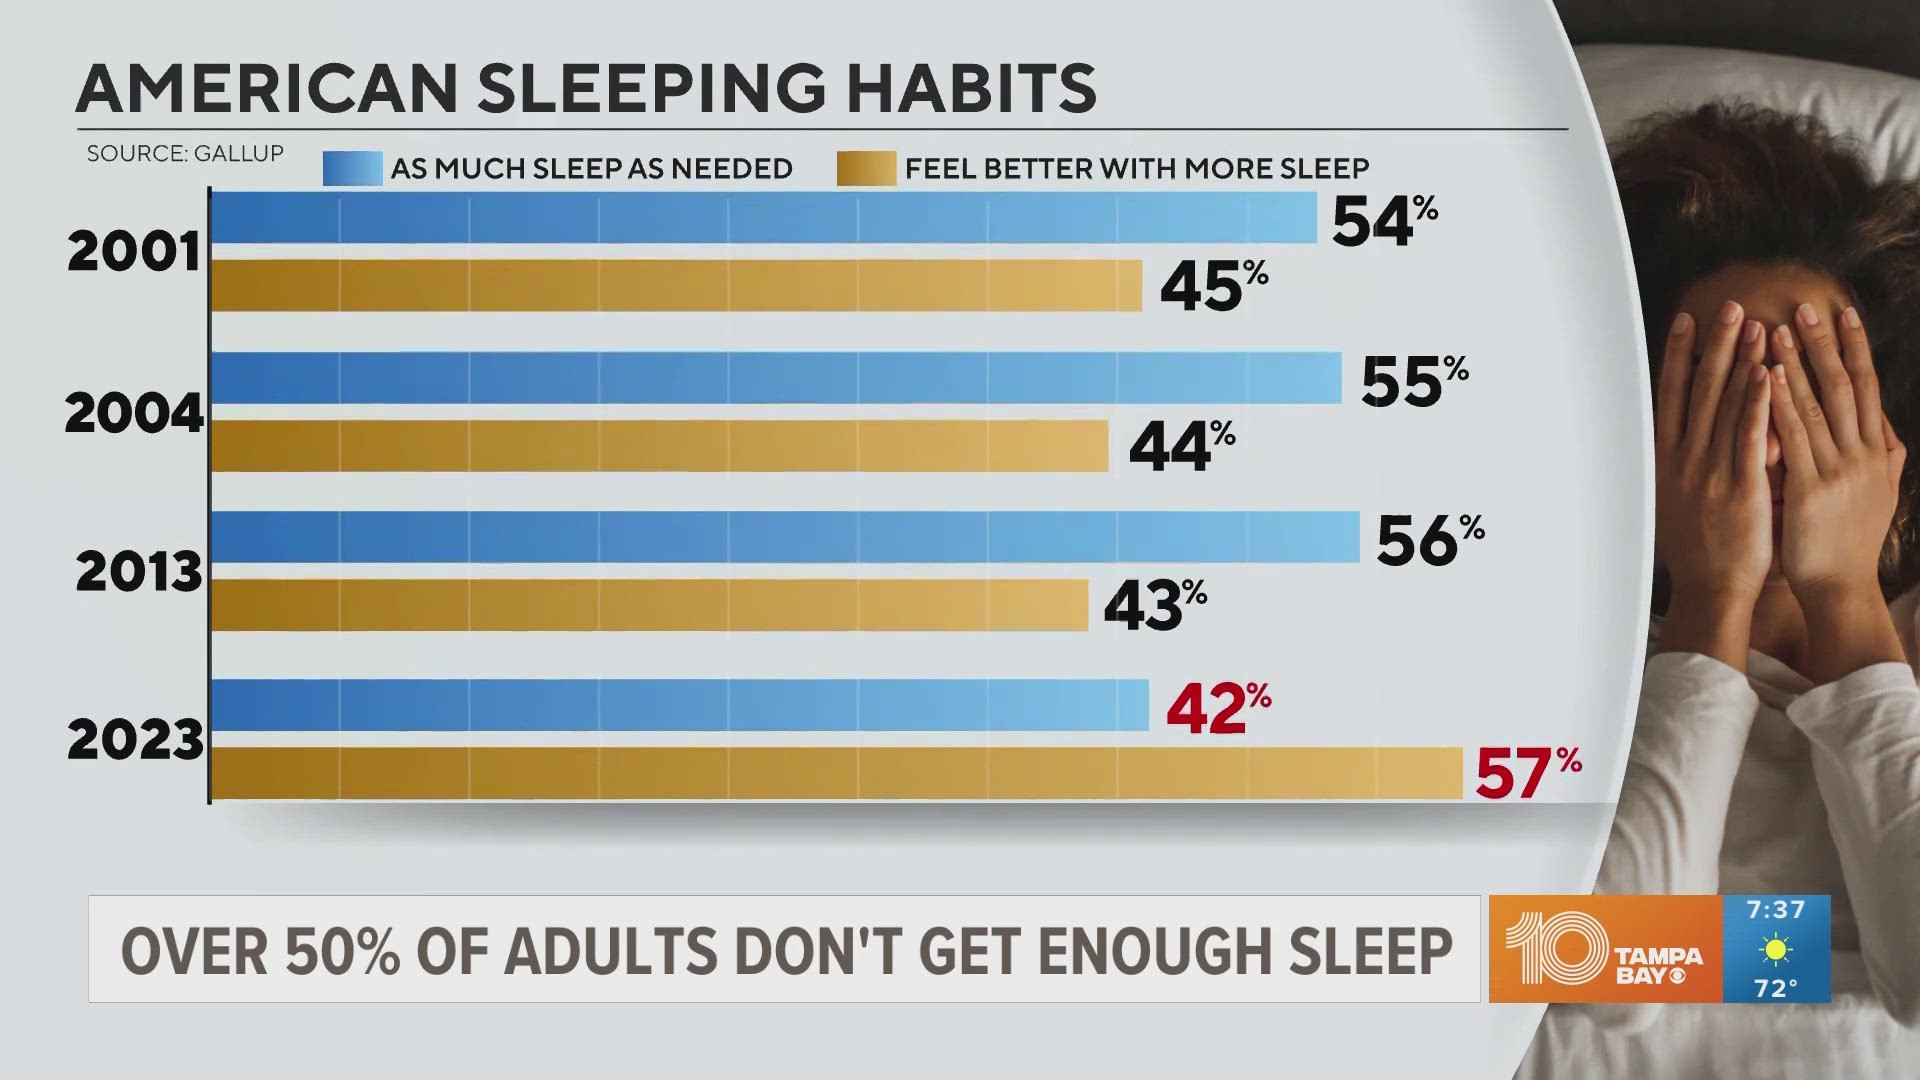 A study found 57% of adults say they would feel better if they got more sleep.